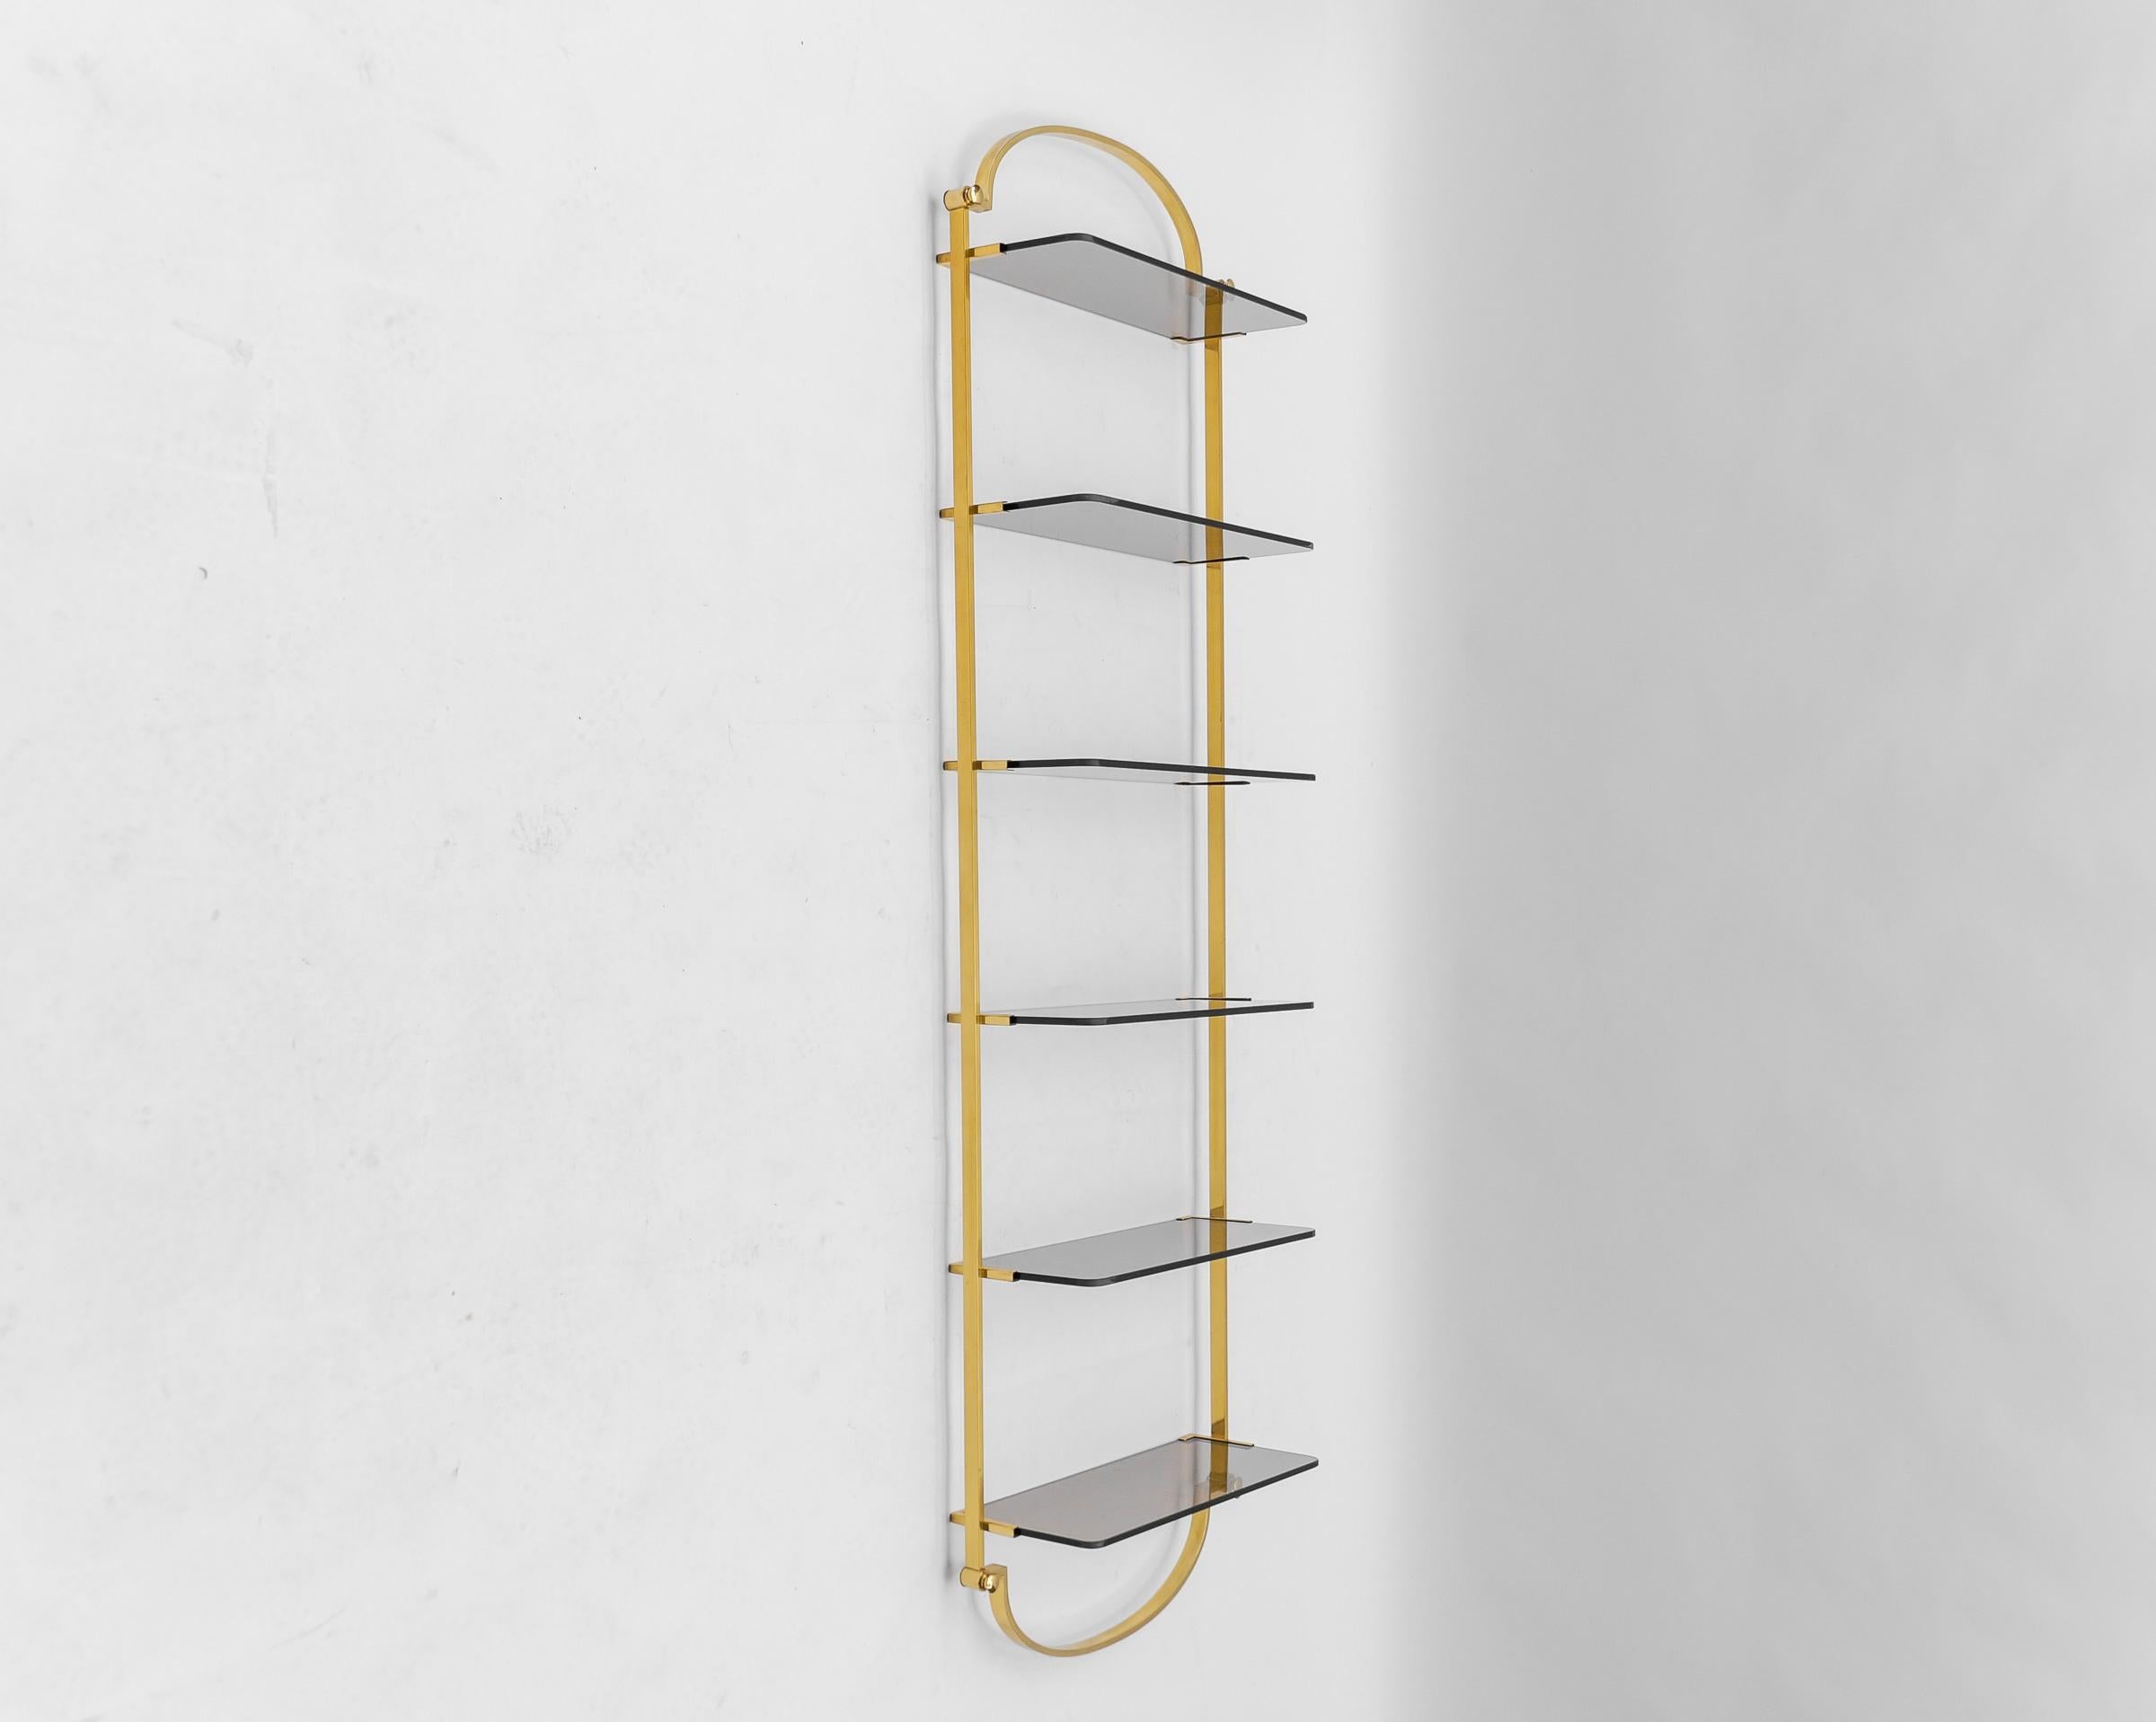 Golden wall shelf with six smoked glass shelves, Italy, 1960s

We also have a larger but slightly larger shelf from this series. 

A shelf floor has a small chip on the edge 